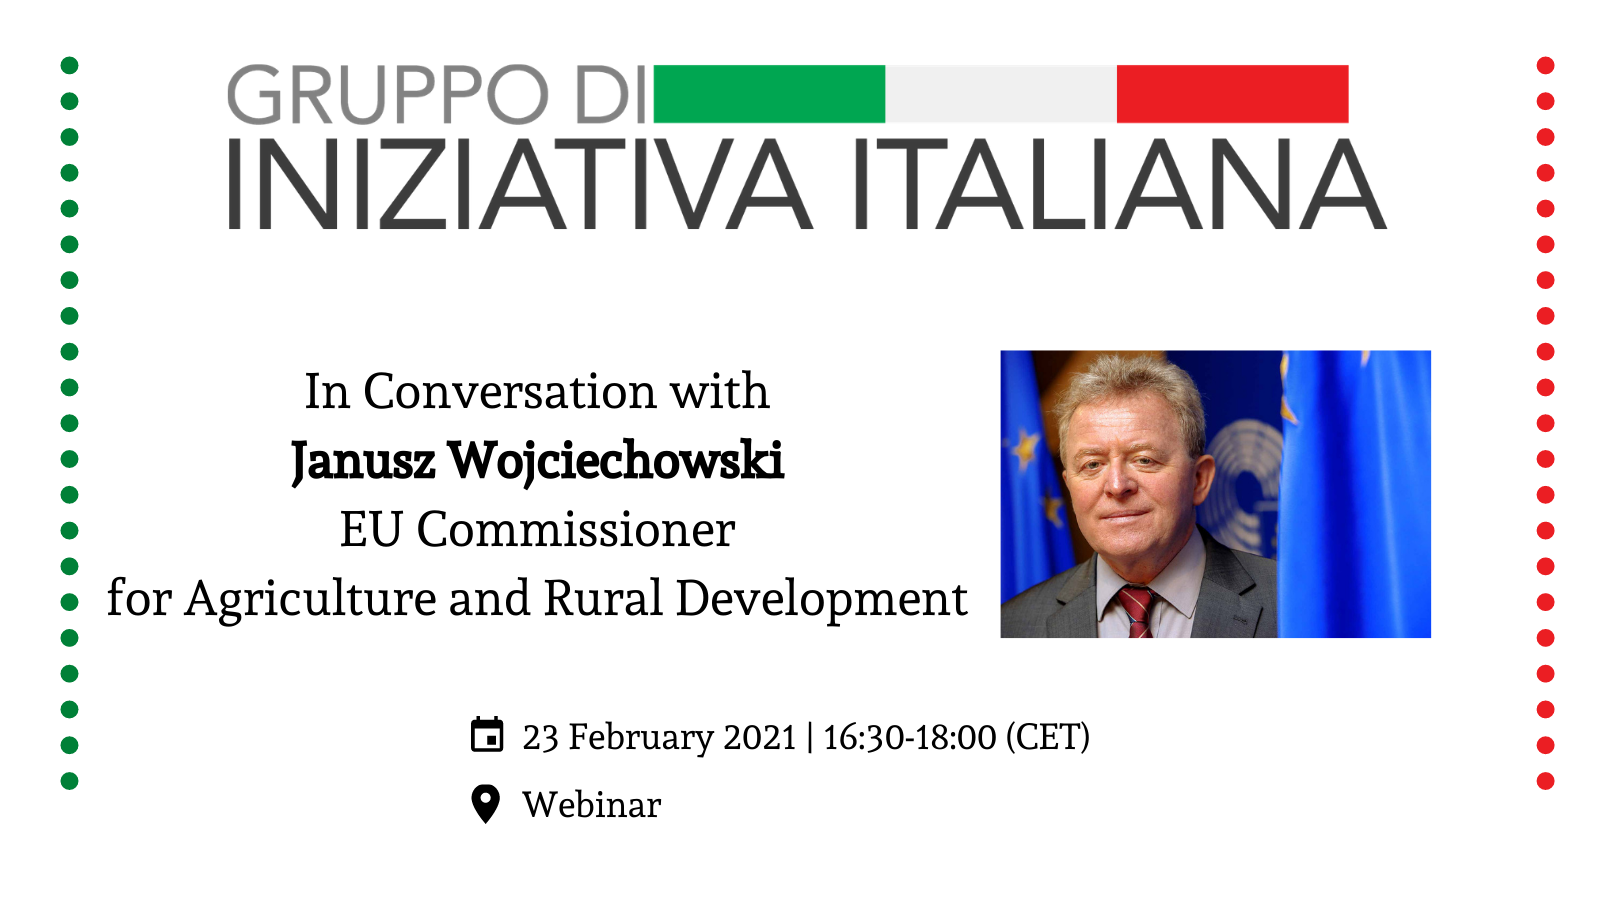 In Conversation with Janusz Wojciechowski| EU Commissioner for Agriculture and Rural Development